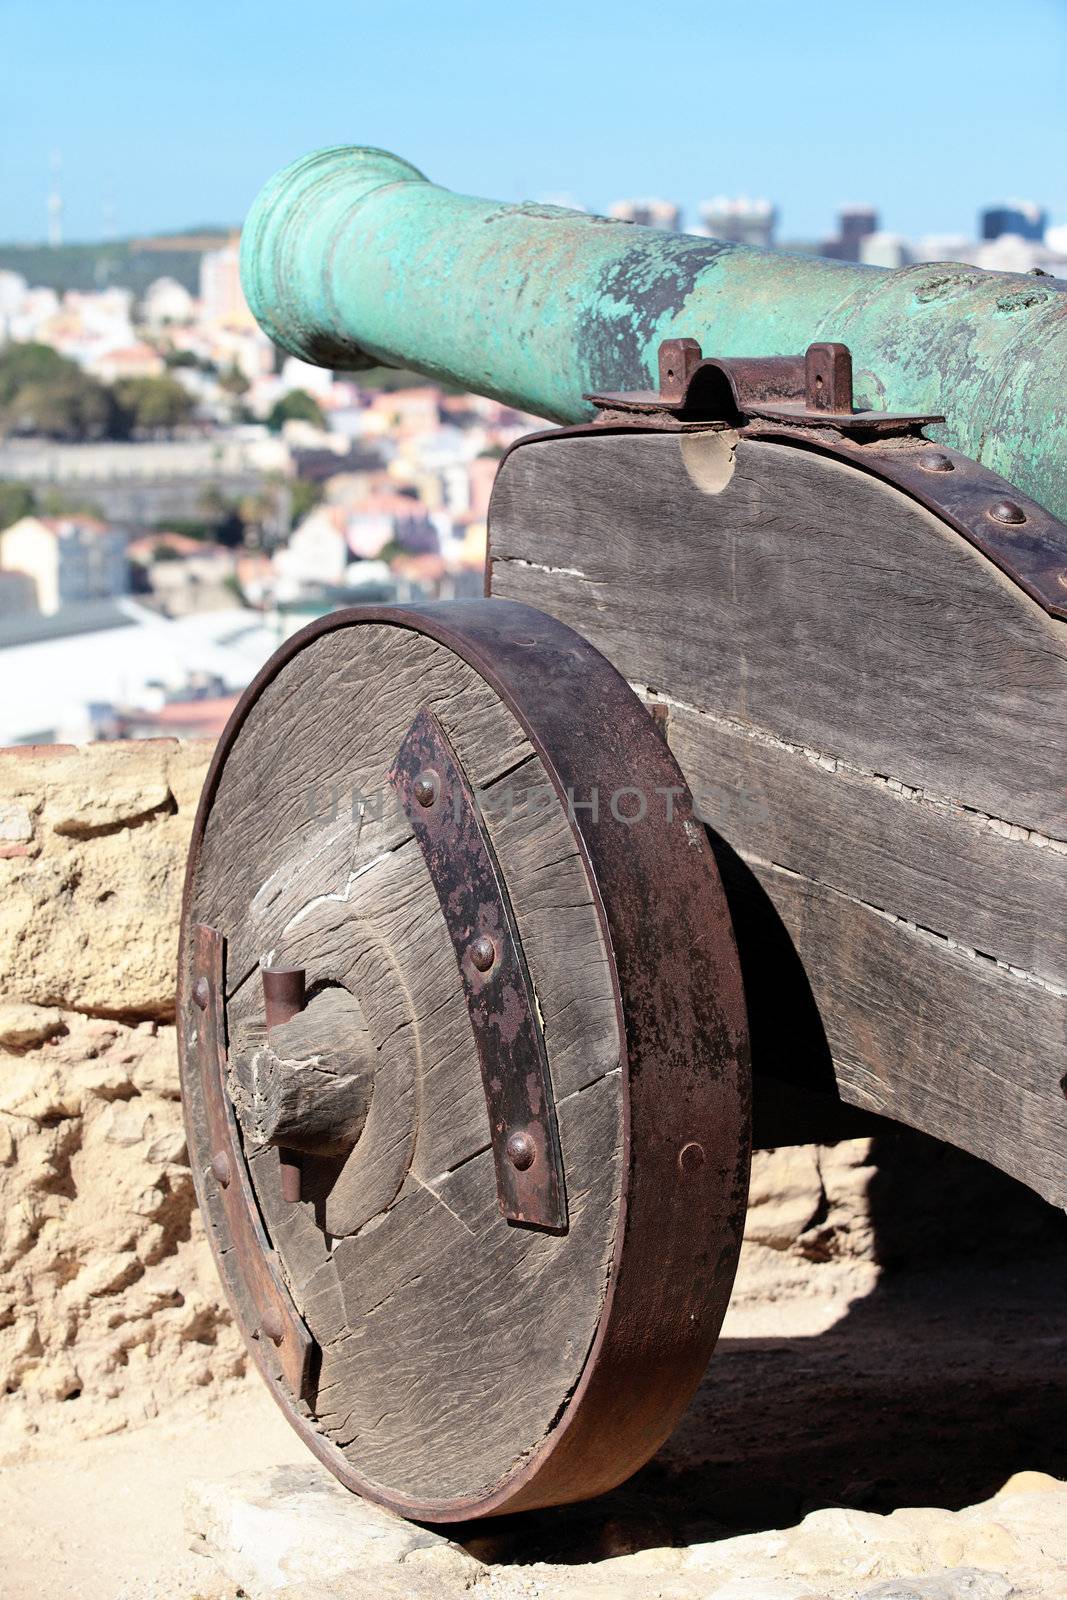 cannon of Saint George Castle in Lisbon, Portugal 